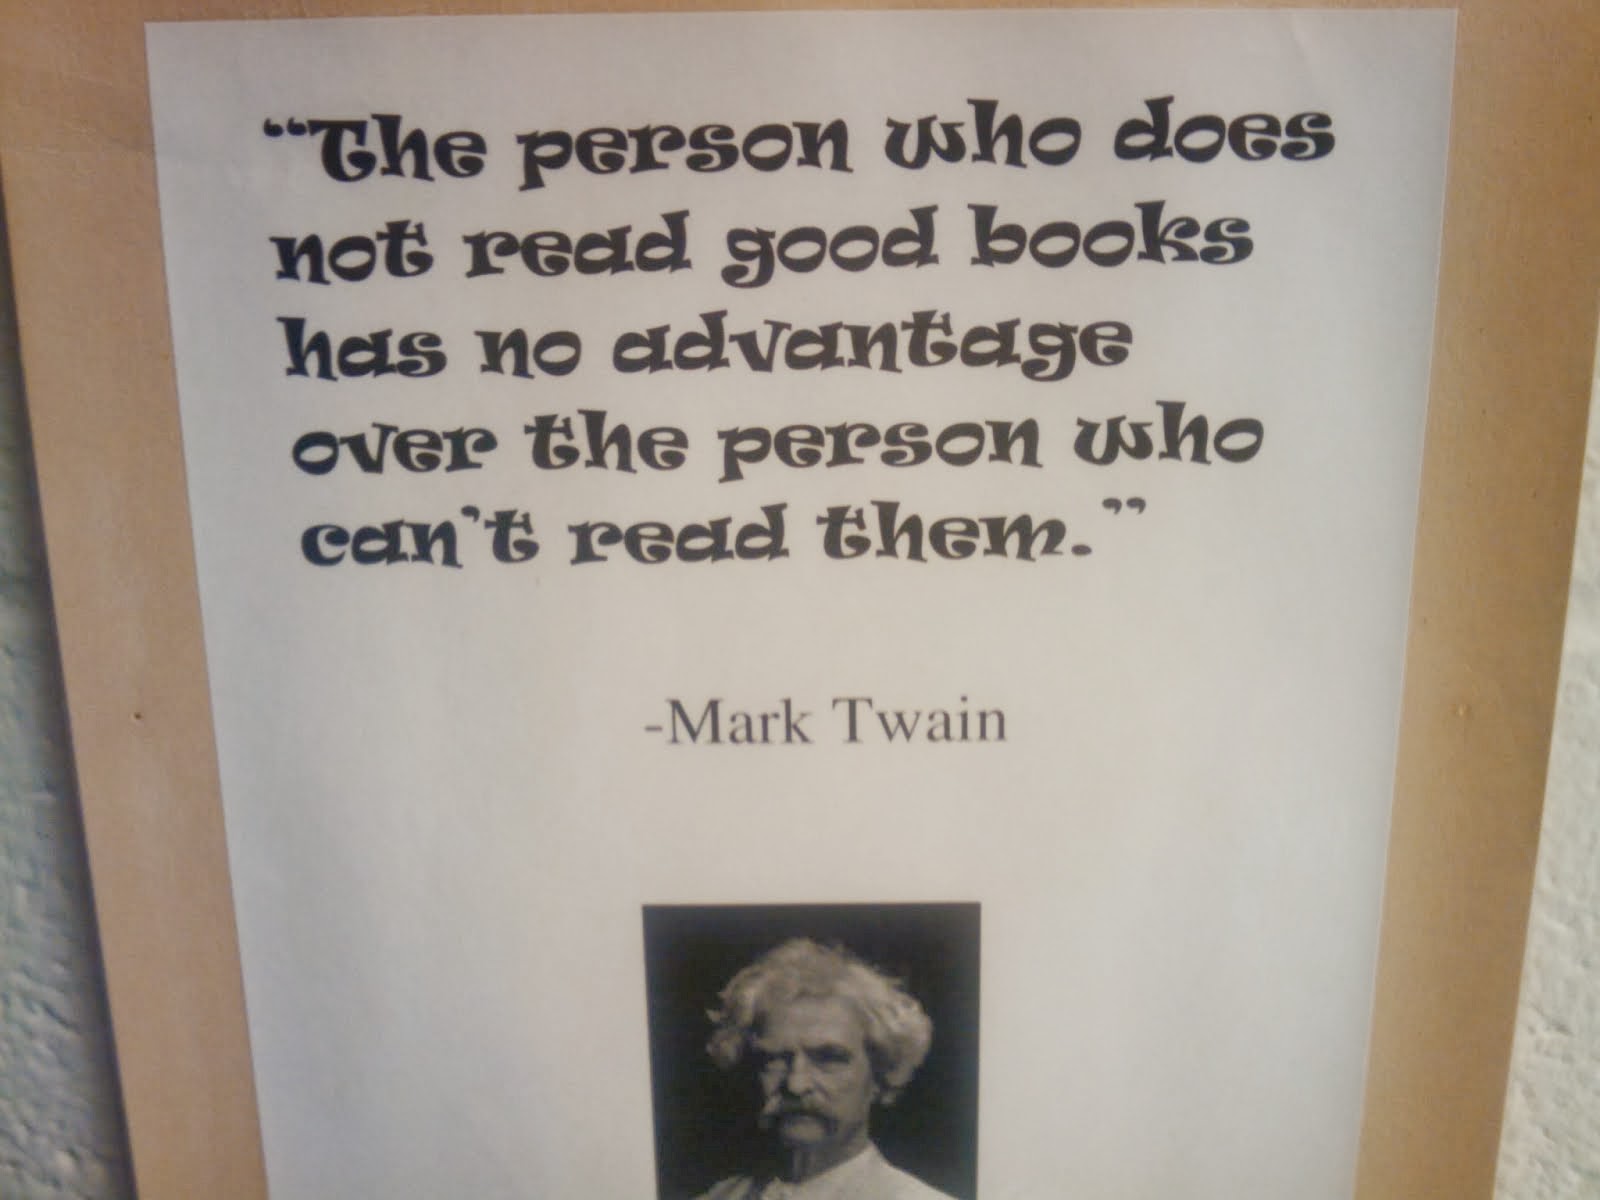 Food for Thought from Mark Twain